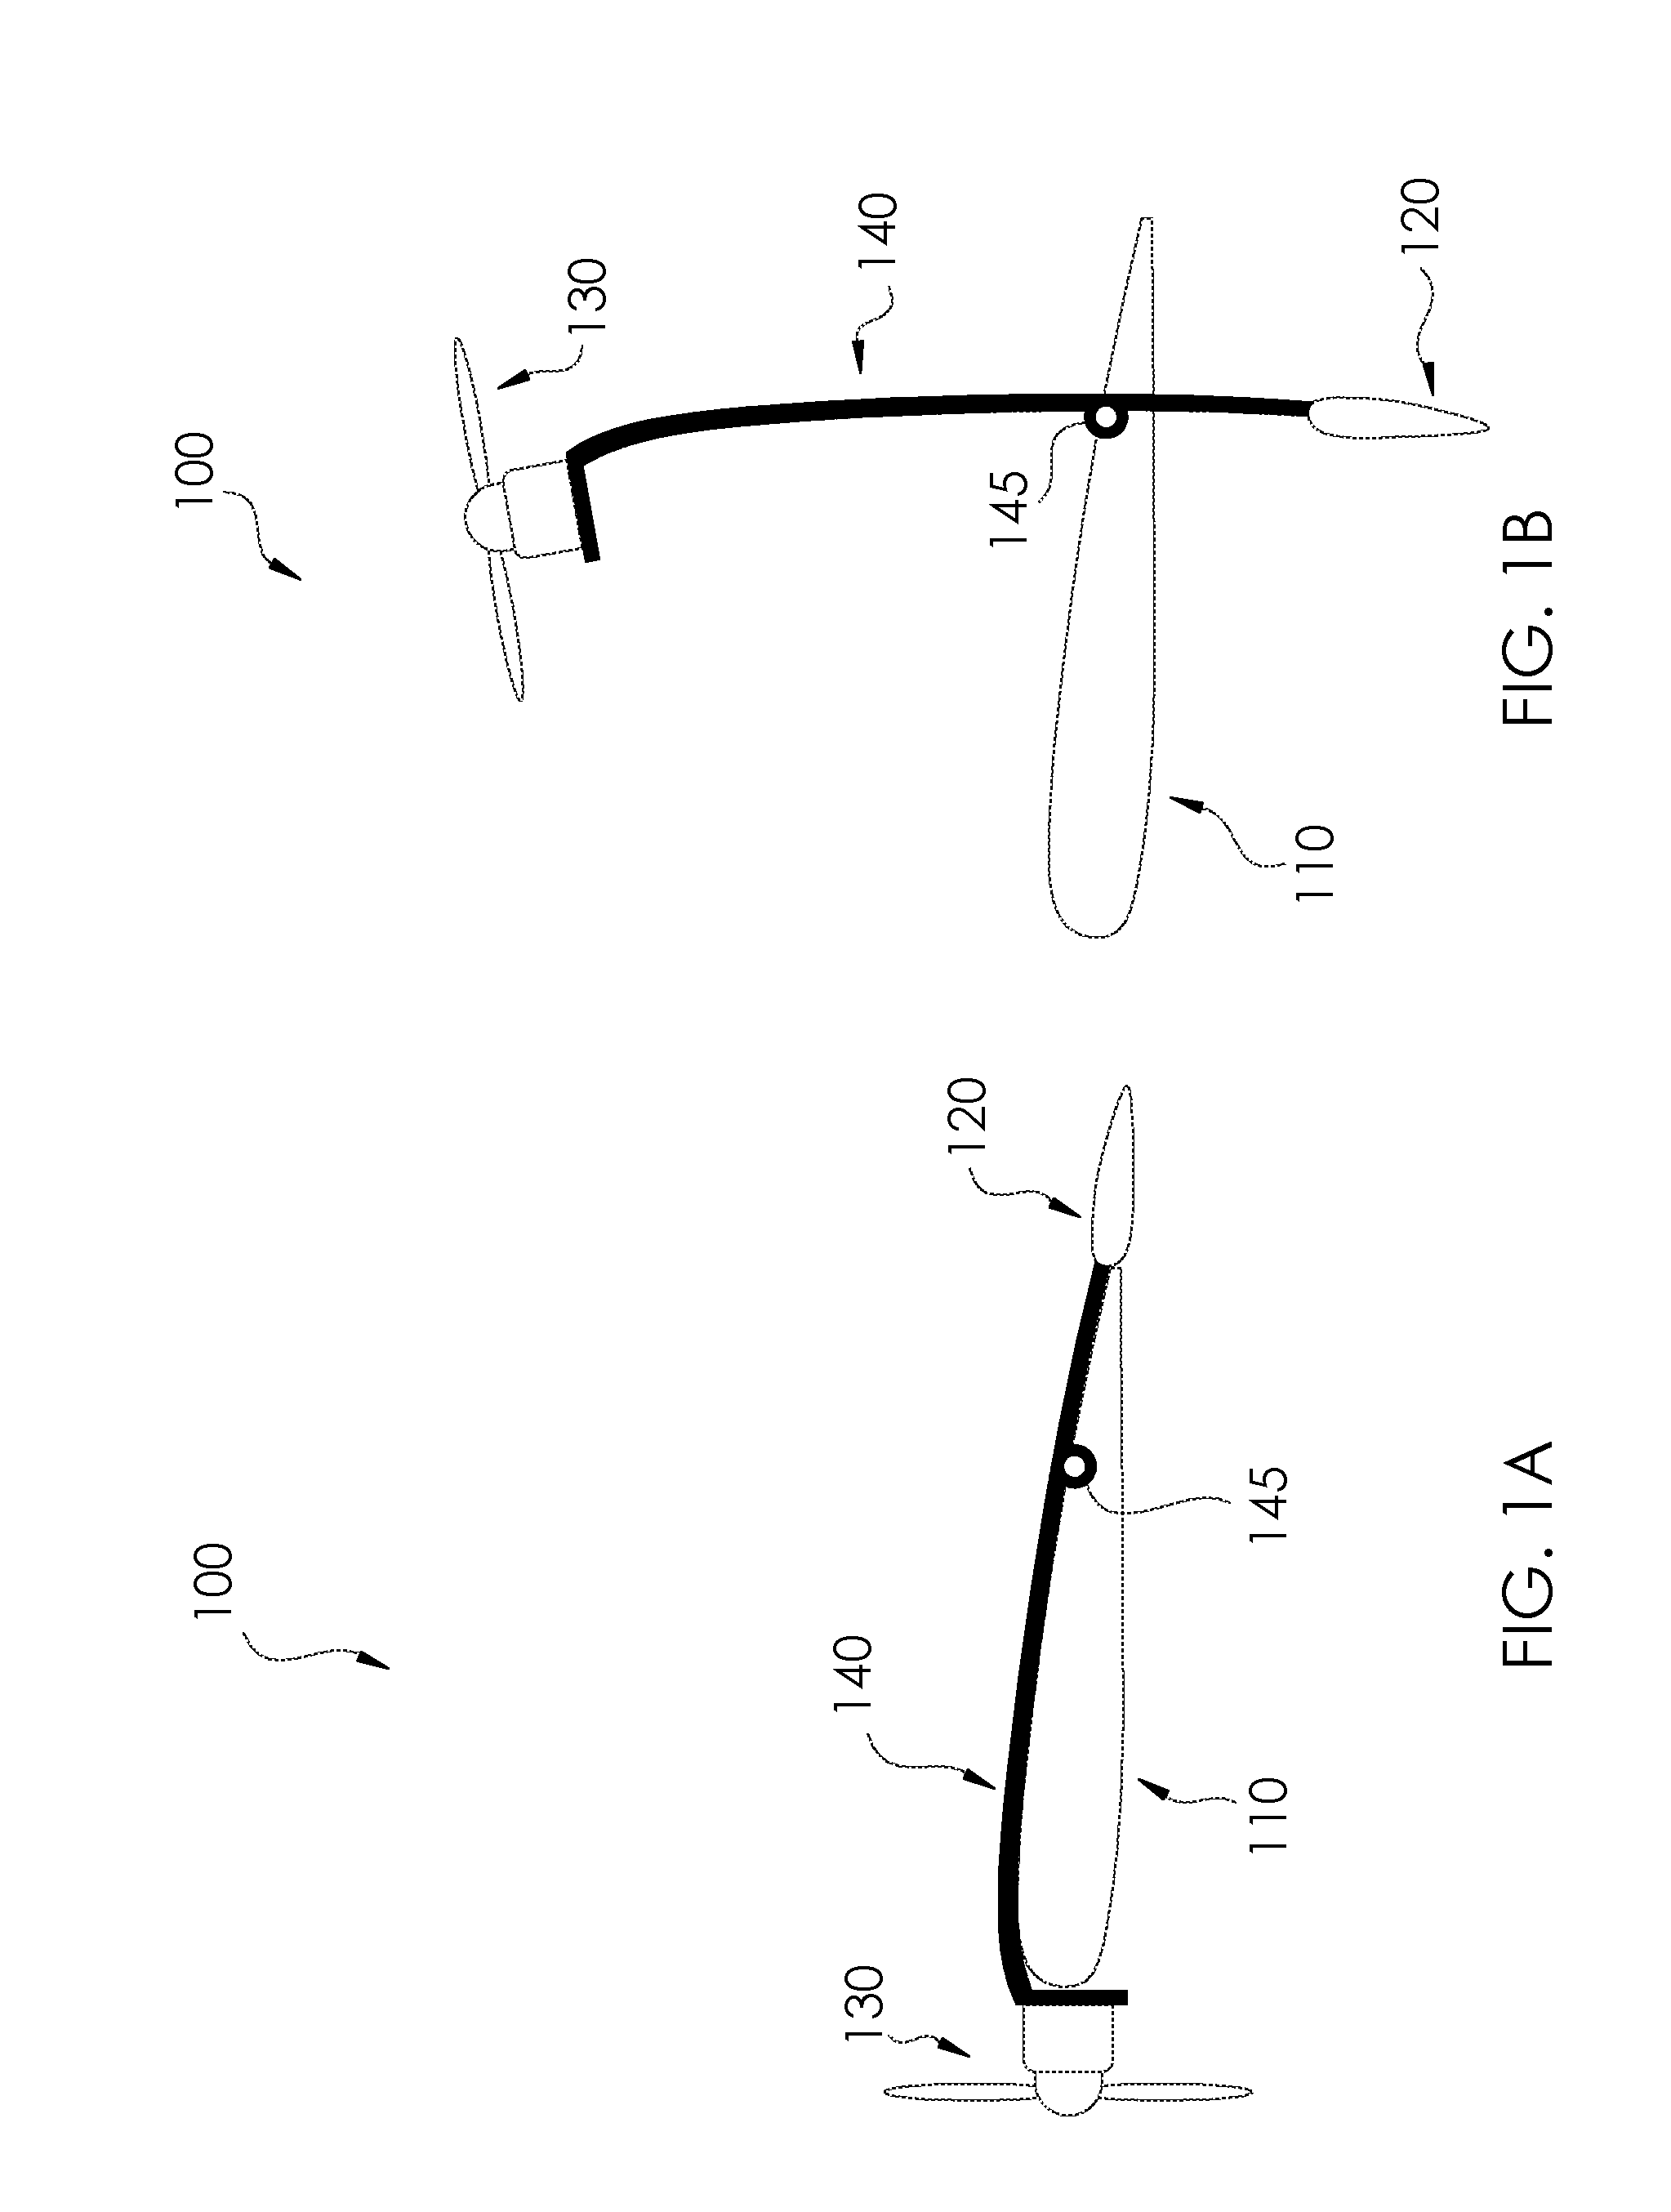 Aerodynamically Actuated Thrust Vectoring Devices